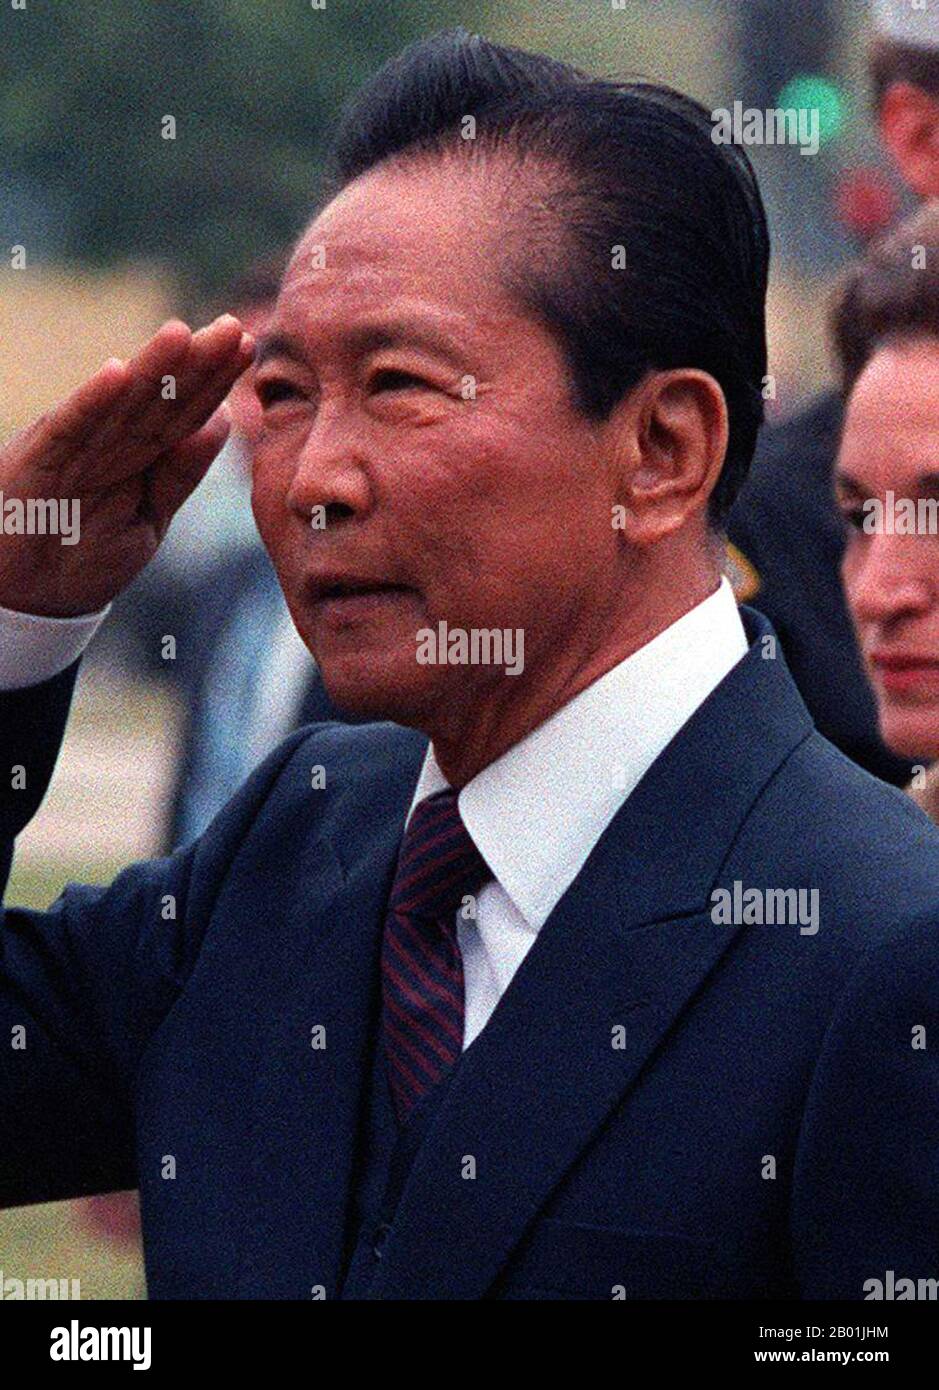 Philippines: Philippine President Ferdinand Marcos at an armed forces full honour departure ceremony, 20 September 1982.  Ferdinand Emmanuel Edralin Marcos (11 September 1917 - 28 September 1989) was the 10th President of the Philippines from 1965 to 1986. He was a lawyer, member of the Philippine House of Representatives (1949-1959) and a member of the Philippine Senate (1959-1965).   In 1983, his government was implicated in the assassination of his primary political opponent, Benigno Aquino, Jr. The implication caused a chain of events that eventually led to his removal from power in 1986. Stock Photo